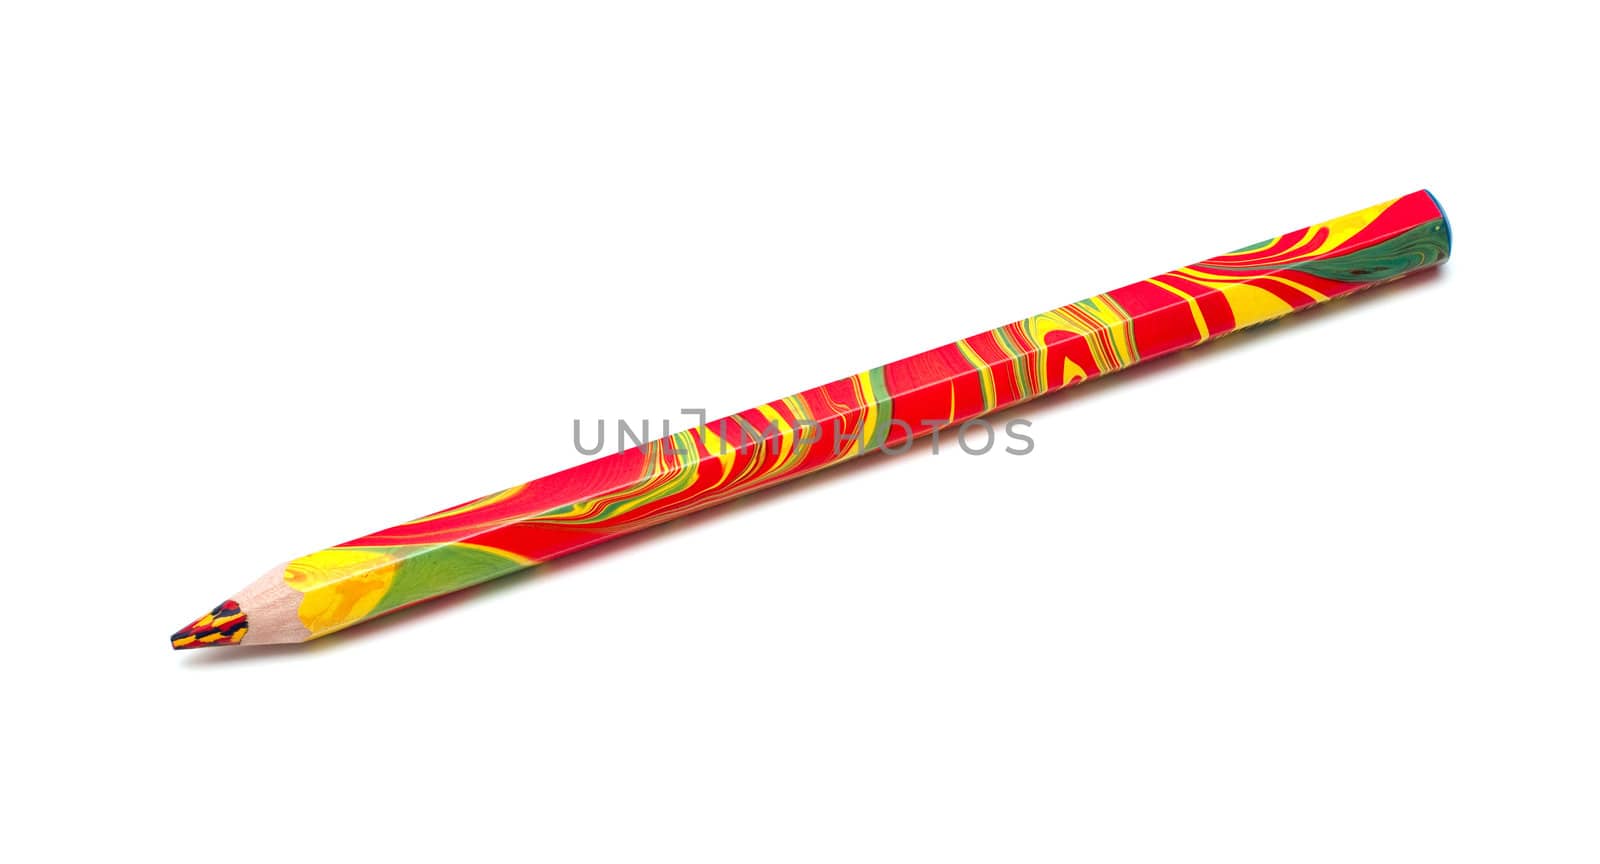 A wooden multi-colour pencil, isolated on the white background